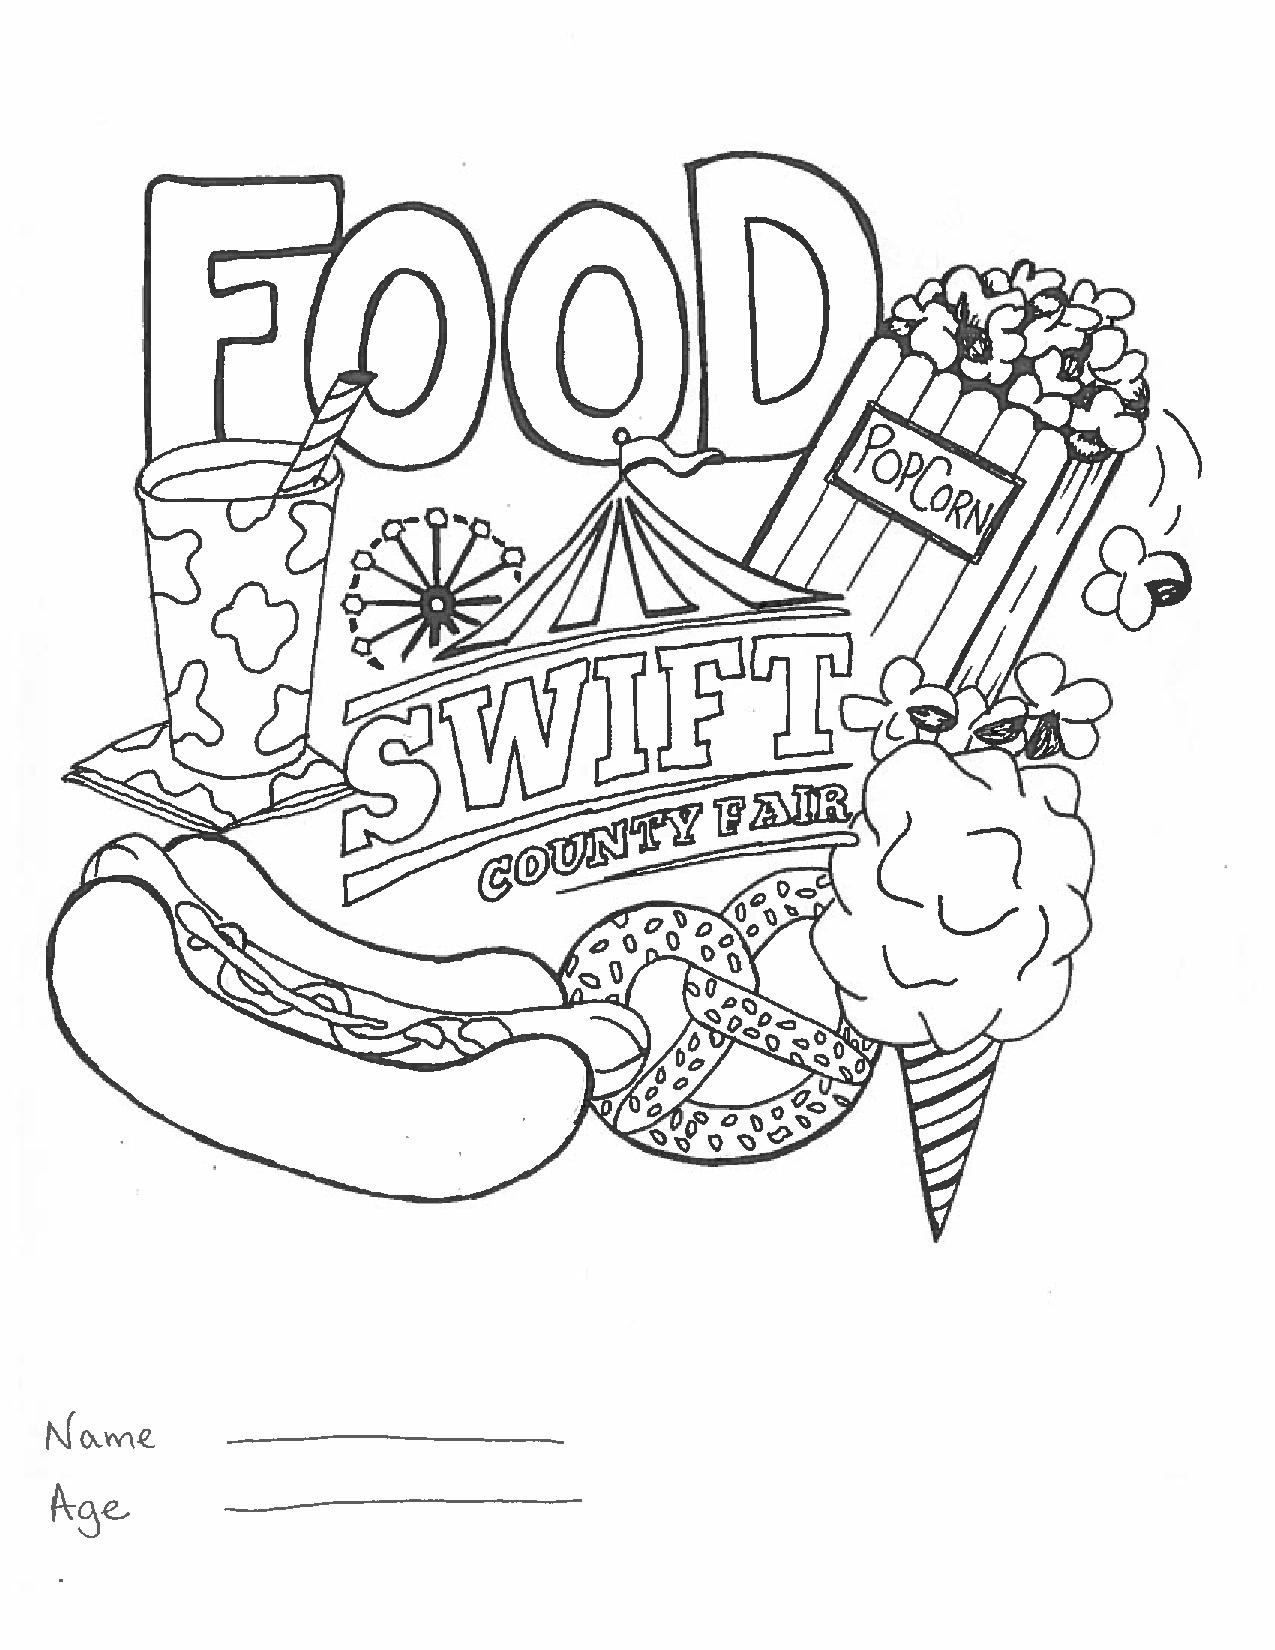 Kids Coloring Contest
 Kids Coloring Contest 2020 Swift County Fair